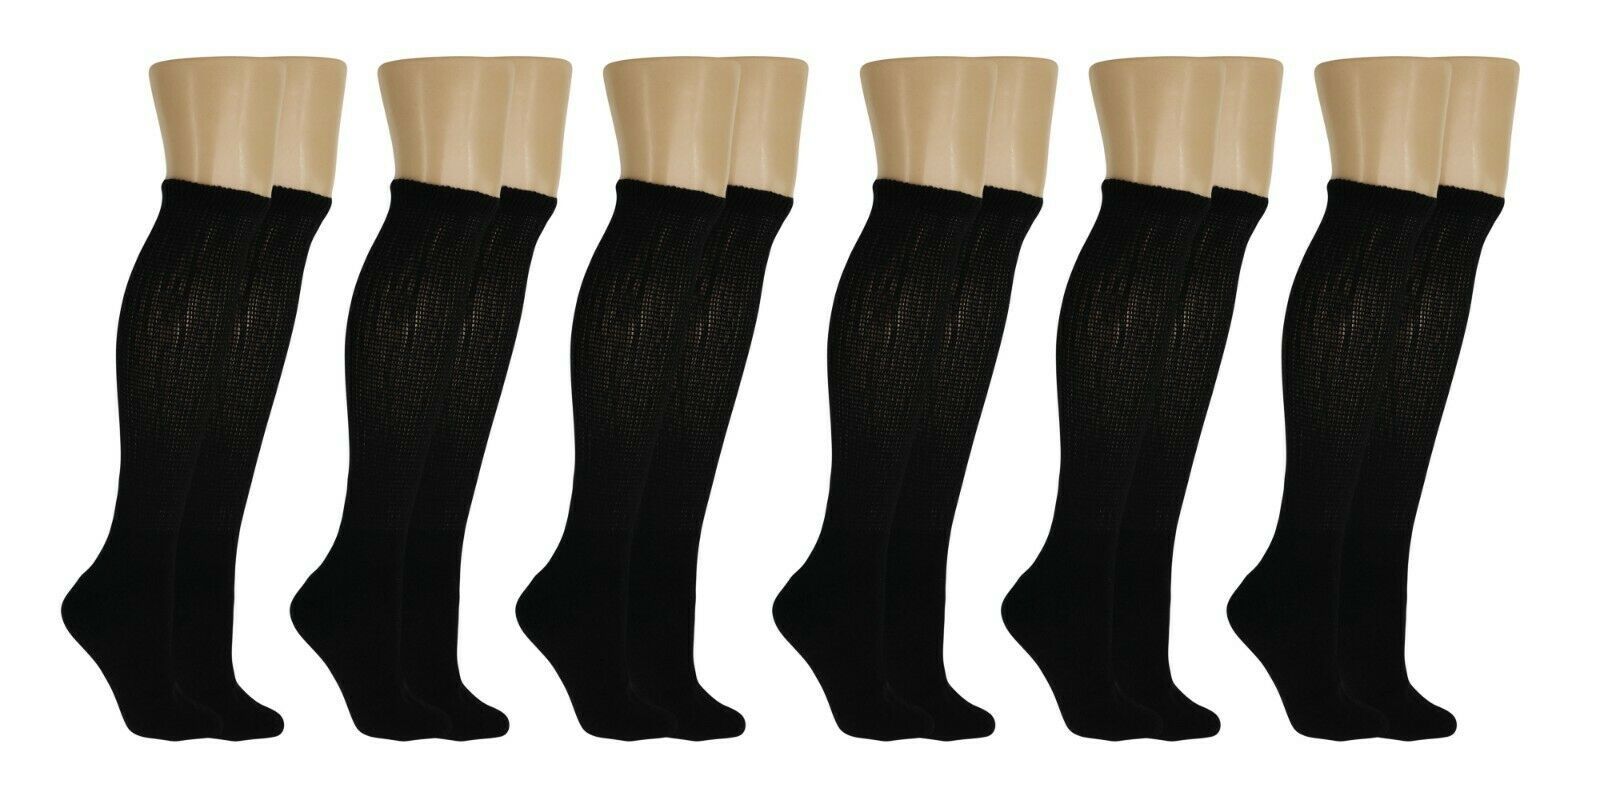 Black Diabetic Knee Socks for Men and Women with Full Cushioned Sole 6 Pairs